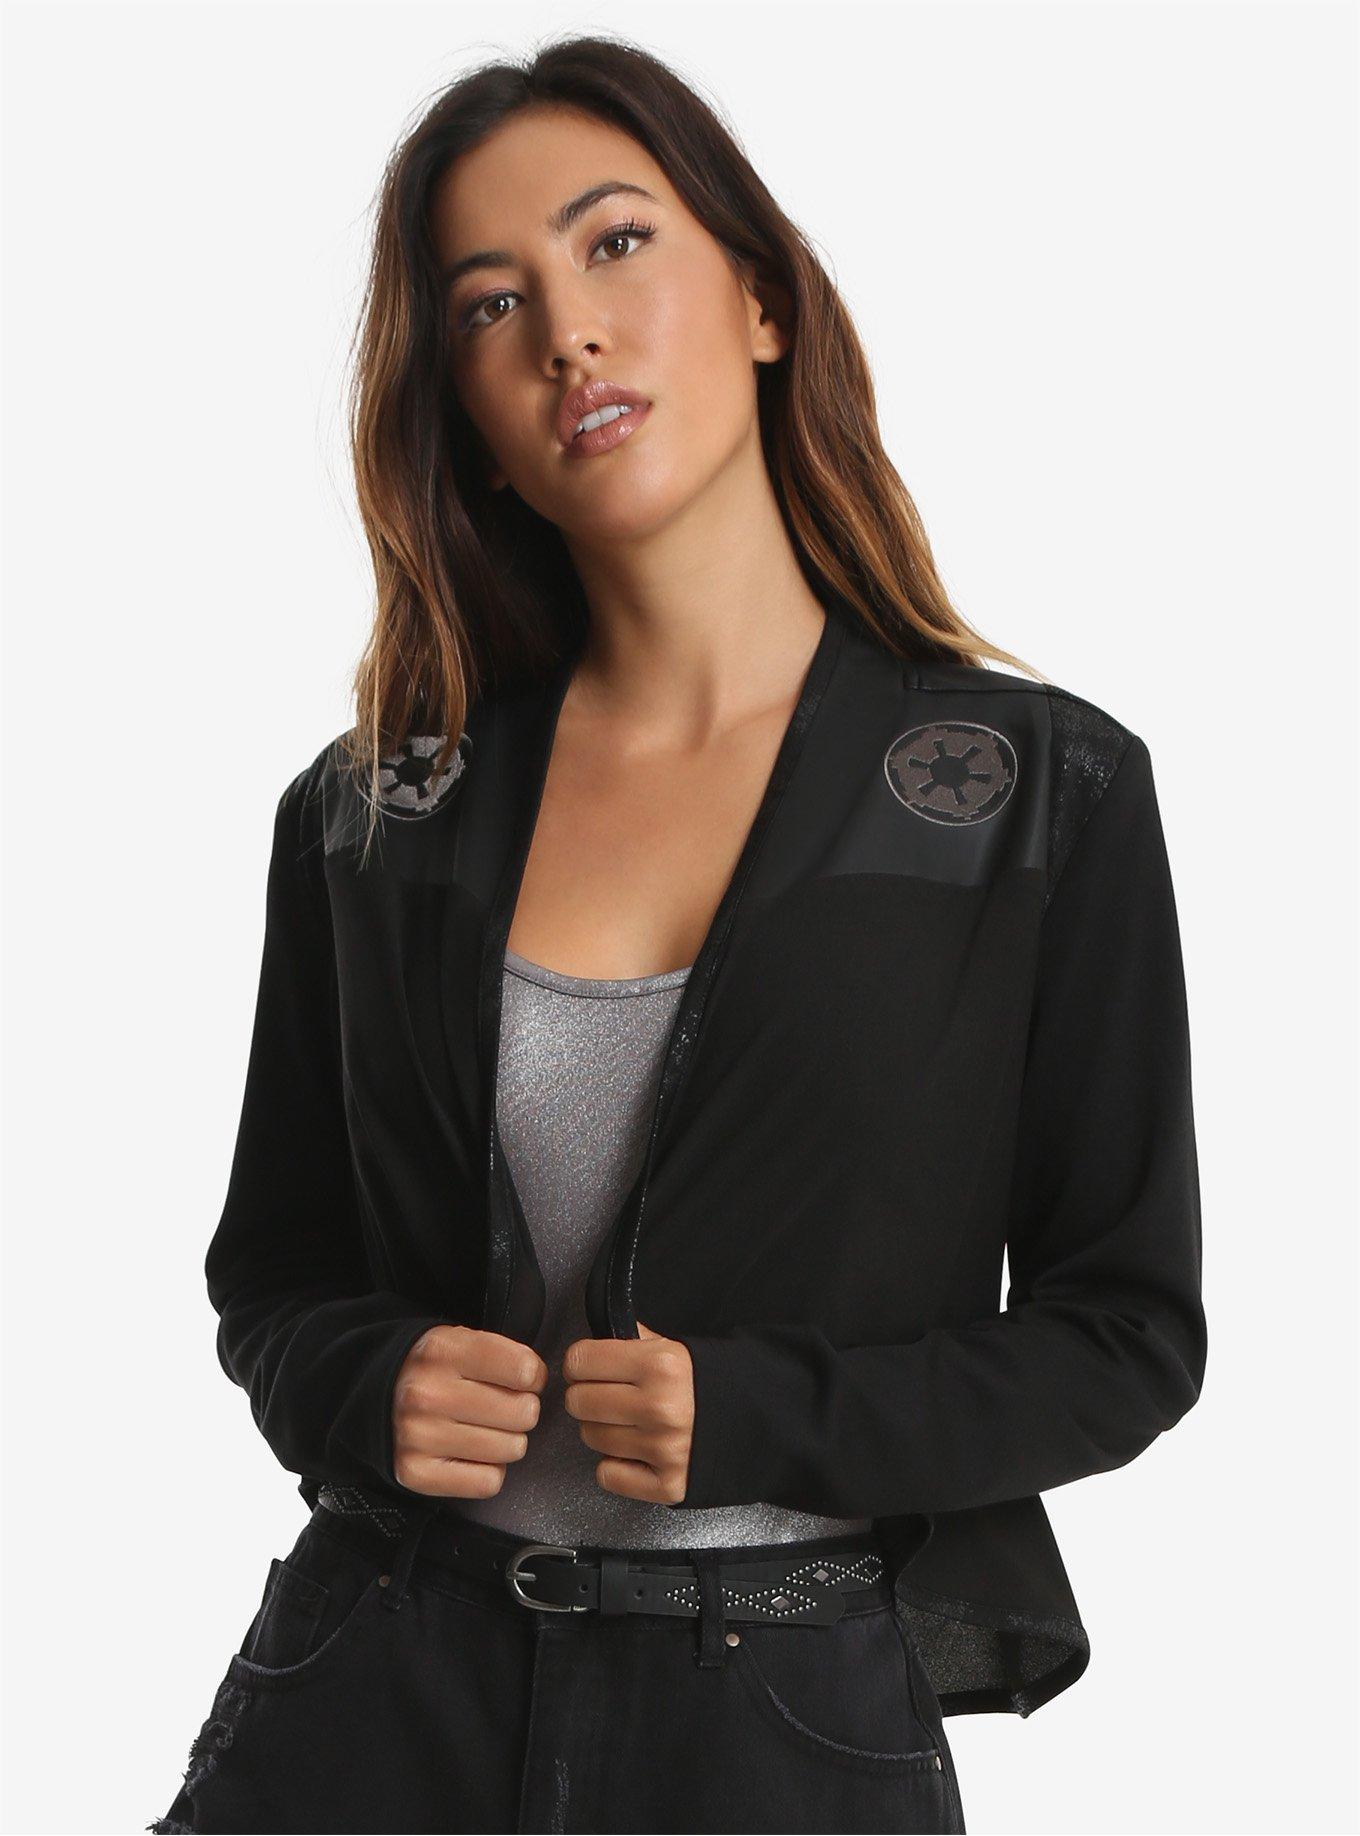 Her Universe Star Wars Imperial Womens Open Jacket, BLACK, hi-res